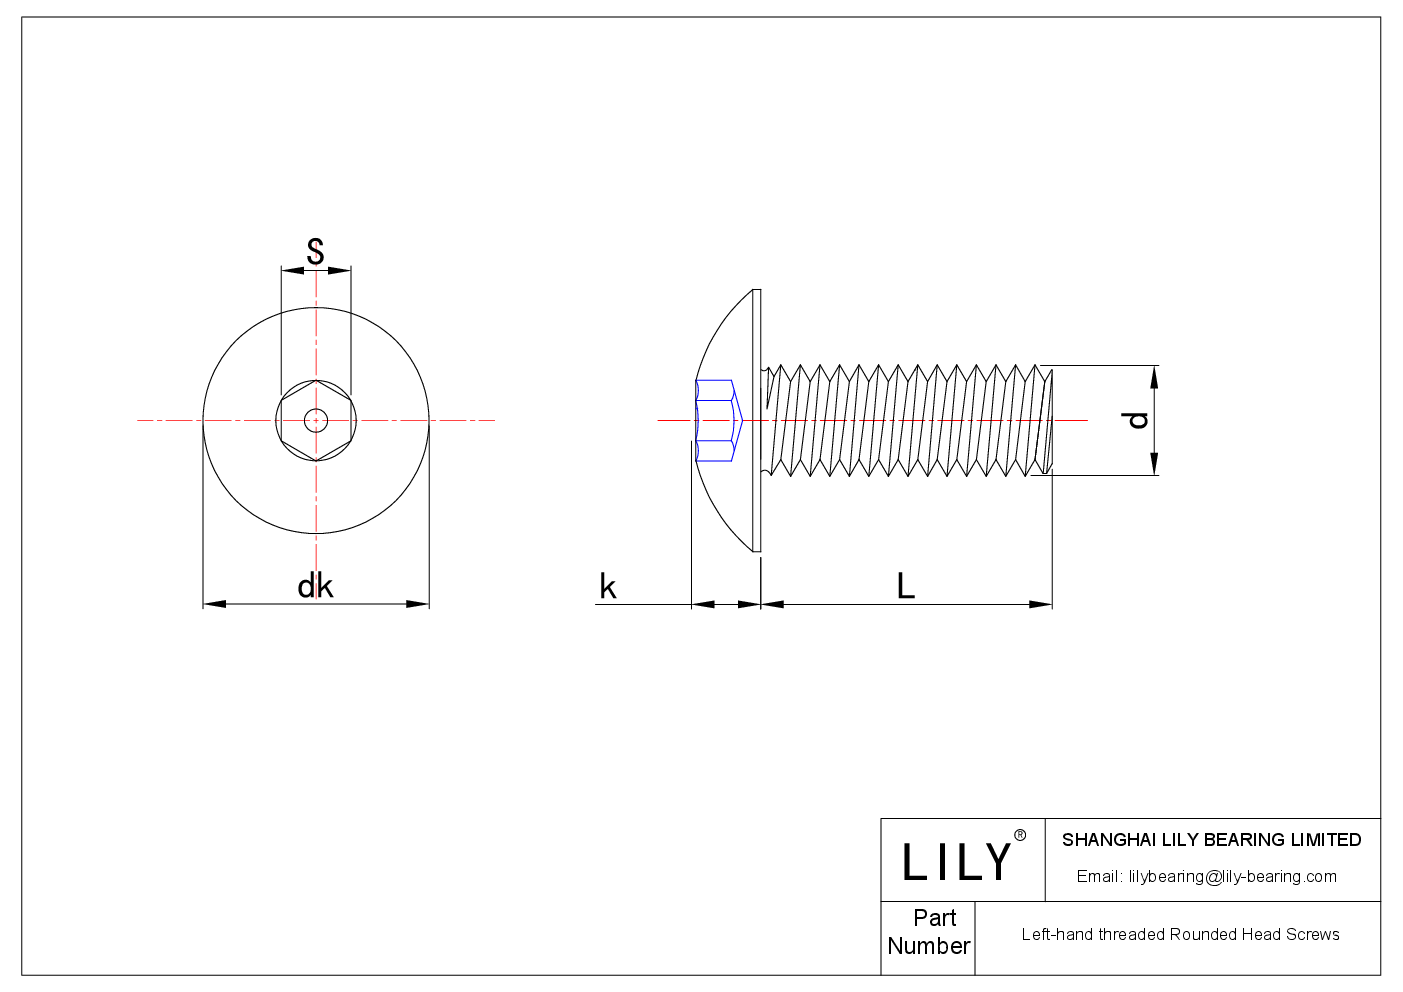 JFJFFACJF Left-Hand Threaded Rounded Head Screws cad drawing